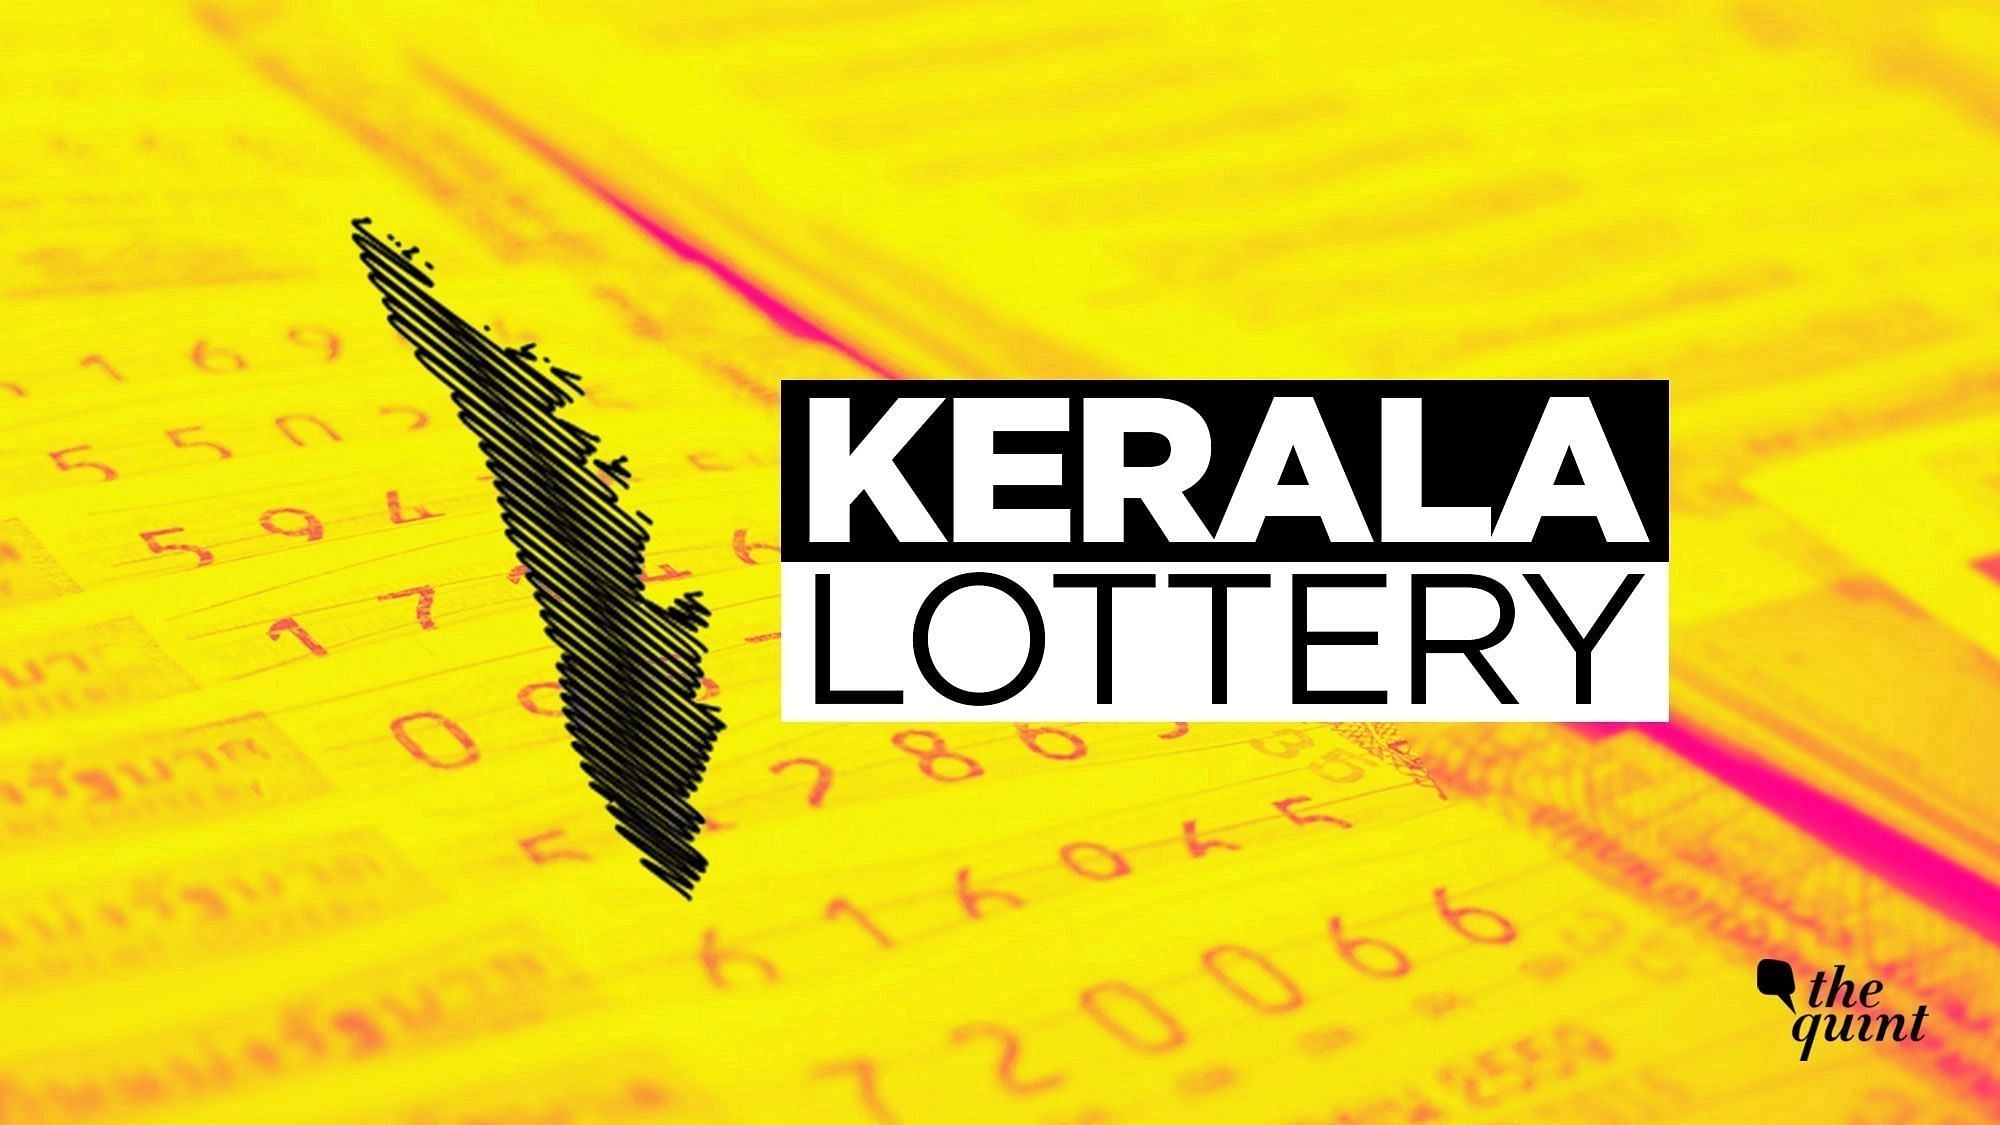 <div class="paragraphs"><p>Here is the Kerala Lottery Win Win W 680 prize list.</p></div>